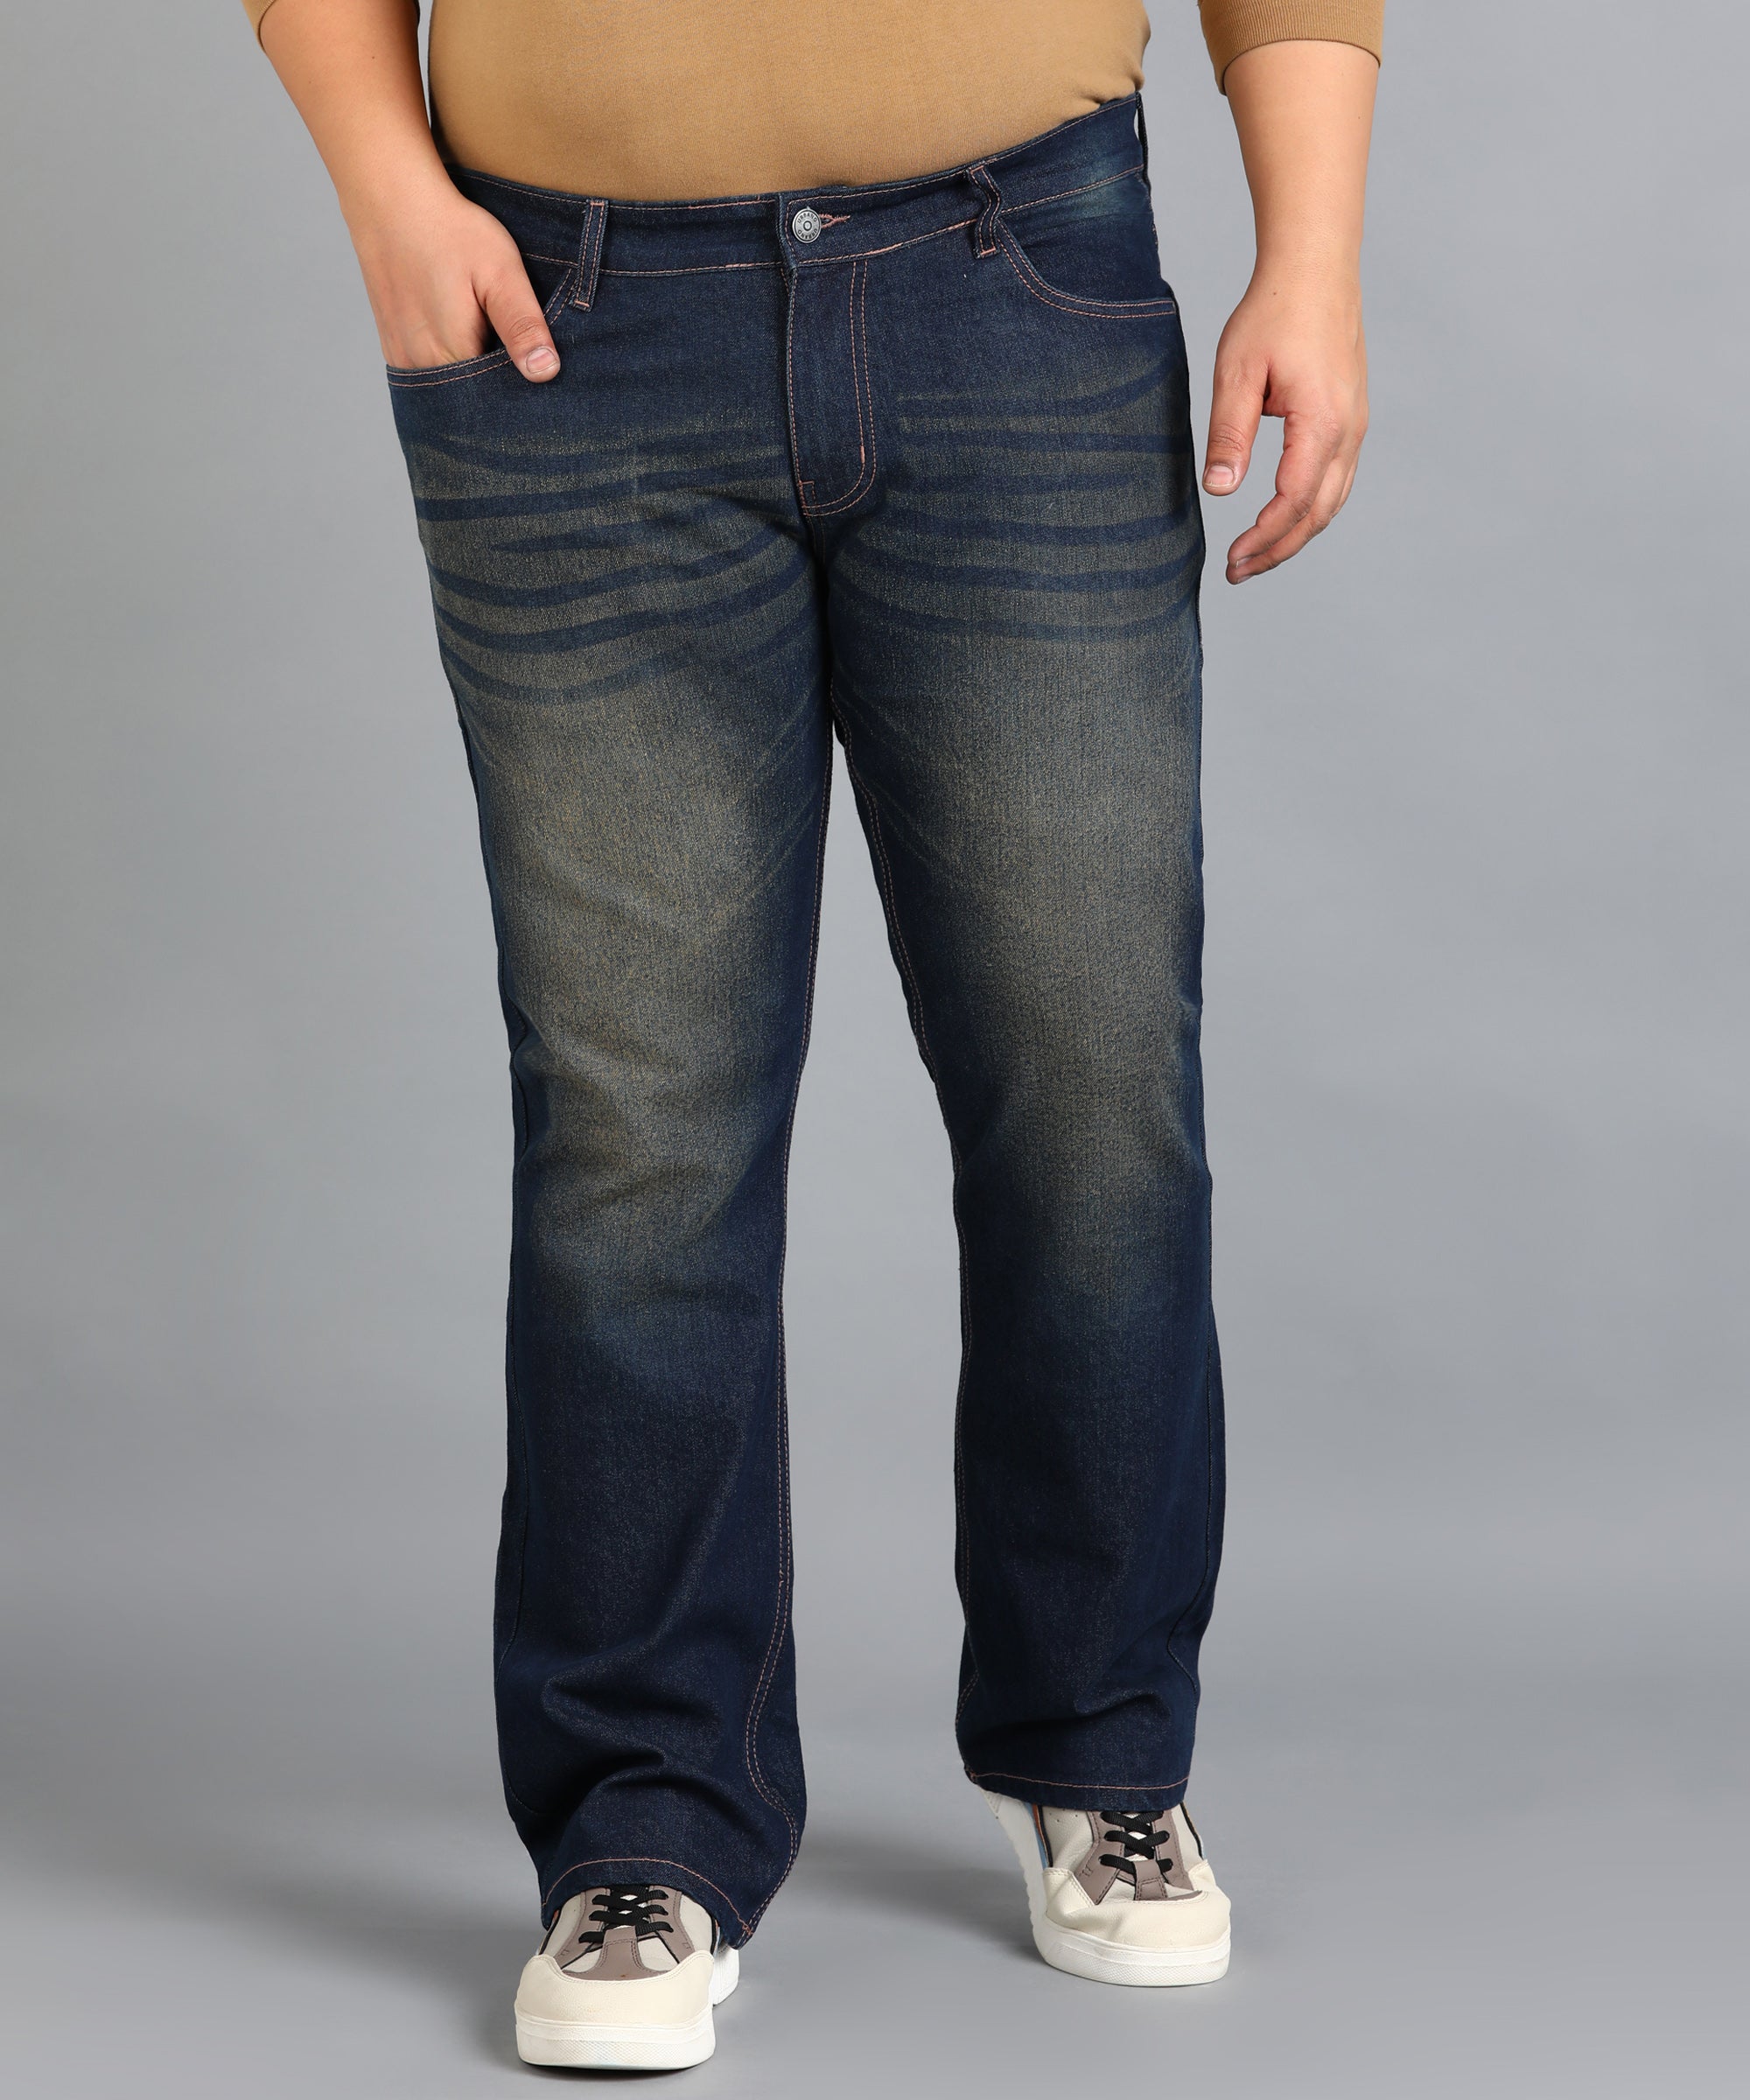 Plus Men's Dark Blue Washed Bootcut Jeans Stretchable